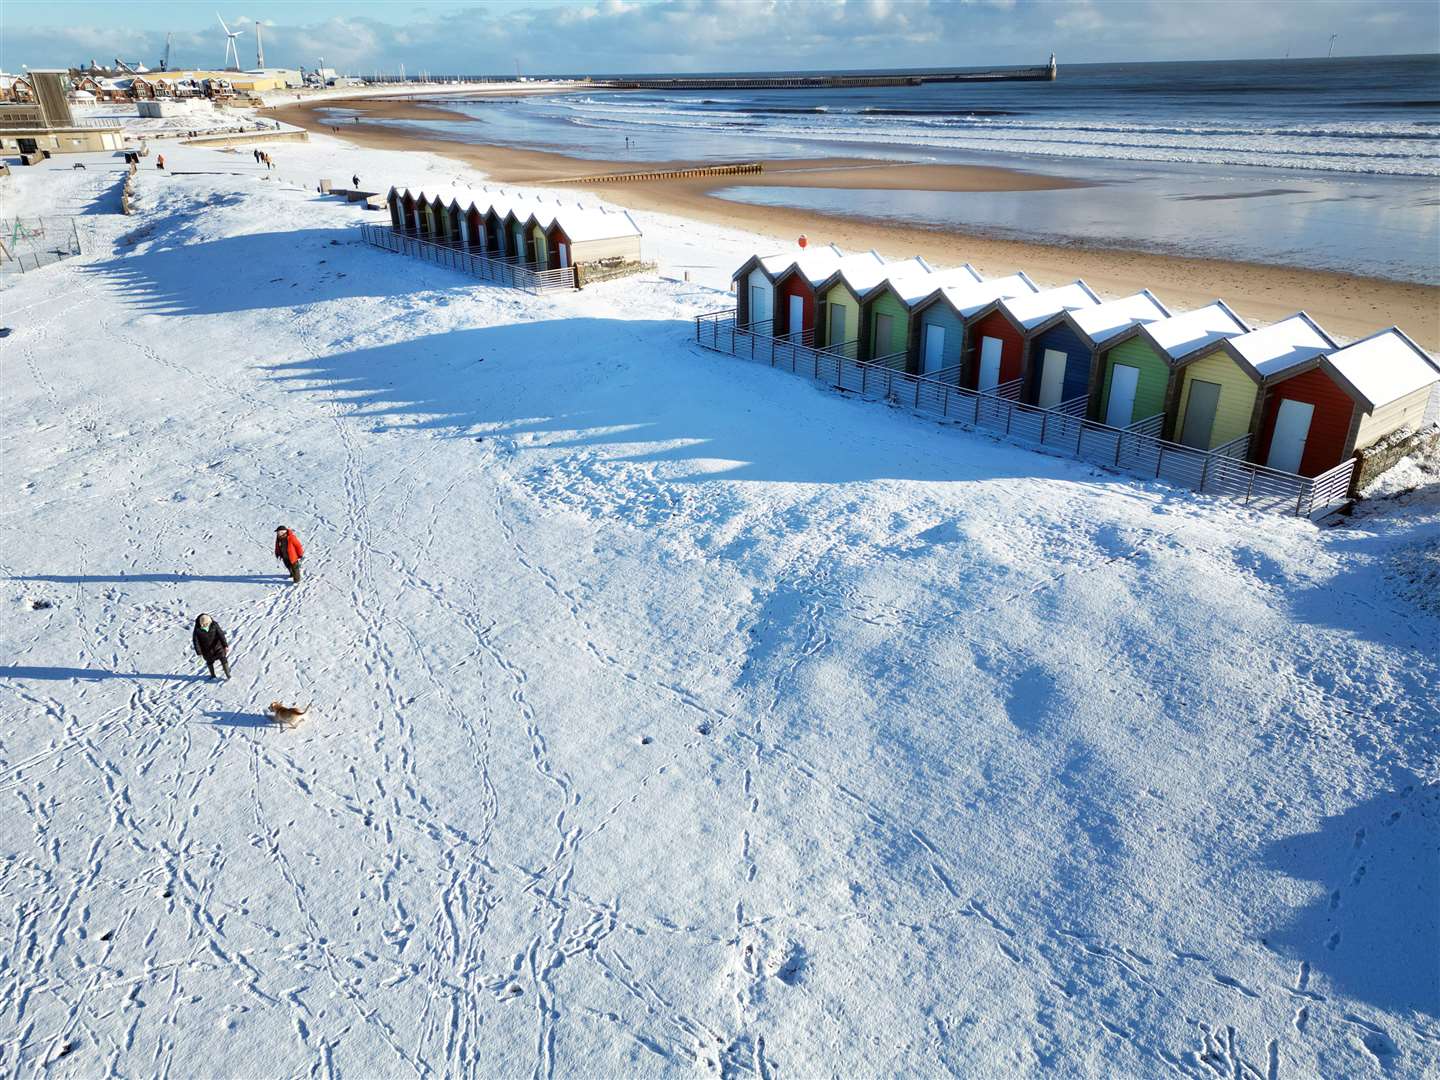 People walk their dogs through the snow beside the beach huts at Blyth in Northumberland (Owen Humphreys/PA)